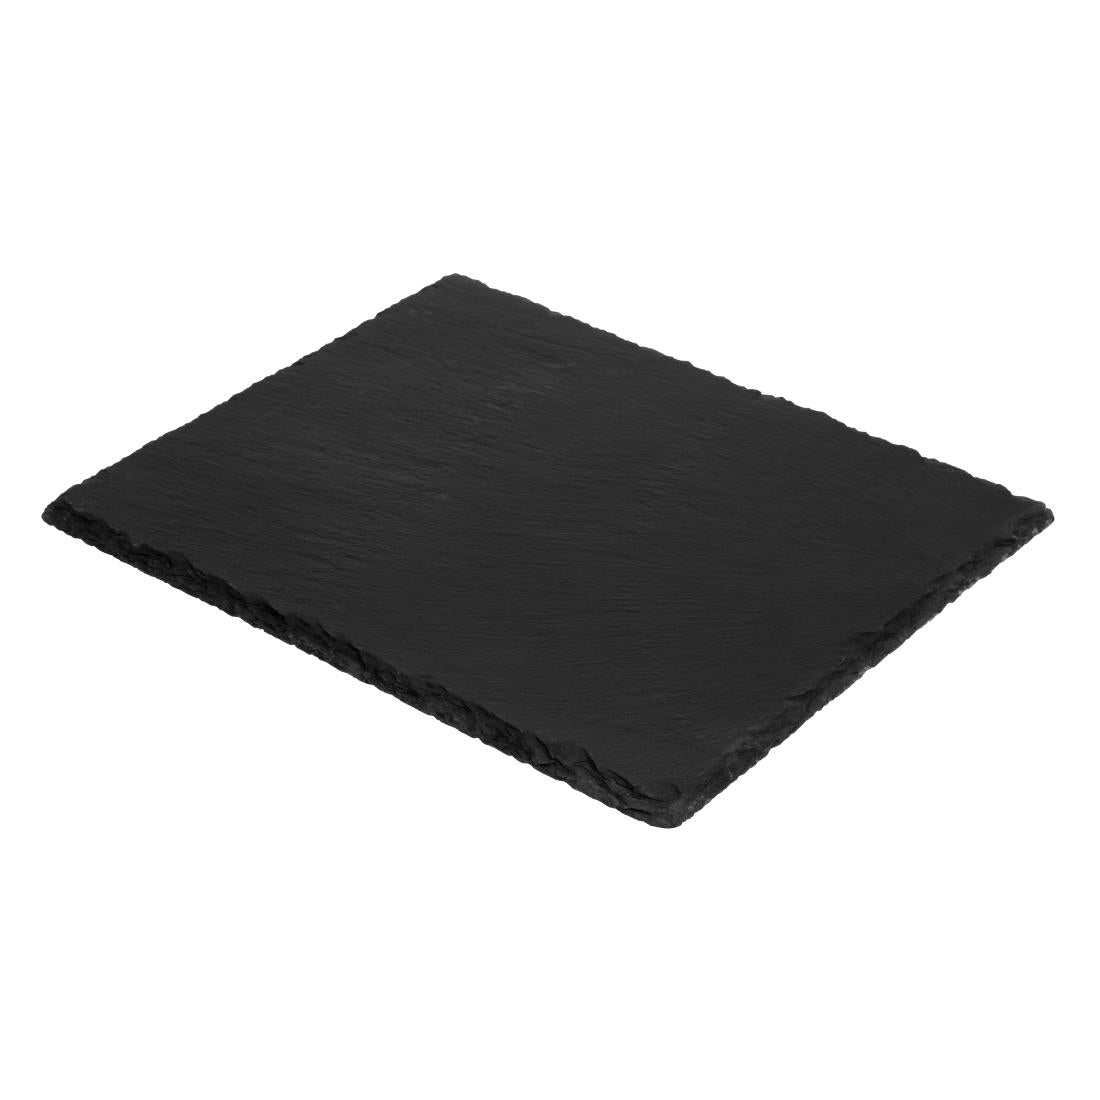 DP161 Olympia Natural Slate Tray GN 1/2 JD Catering Equipment Solutions Ltd